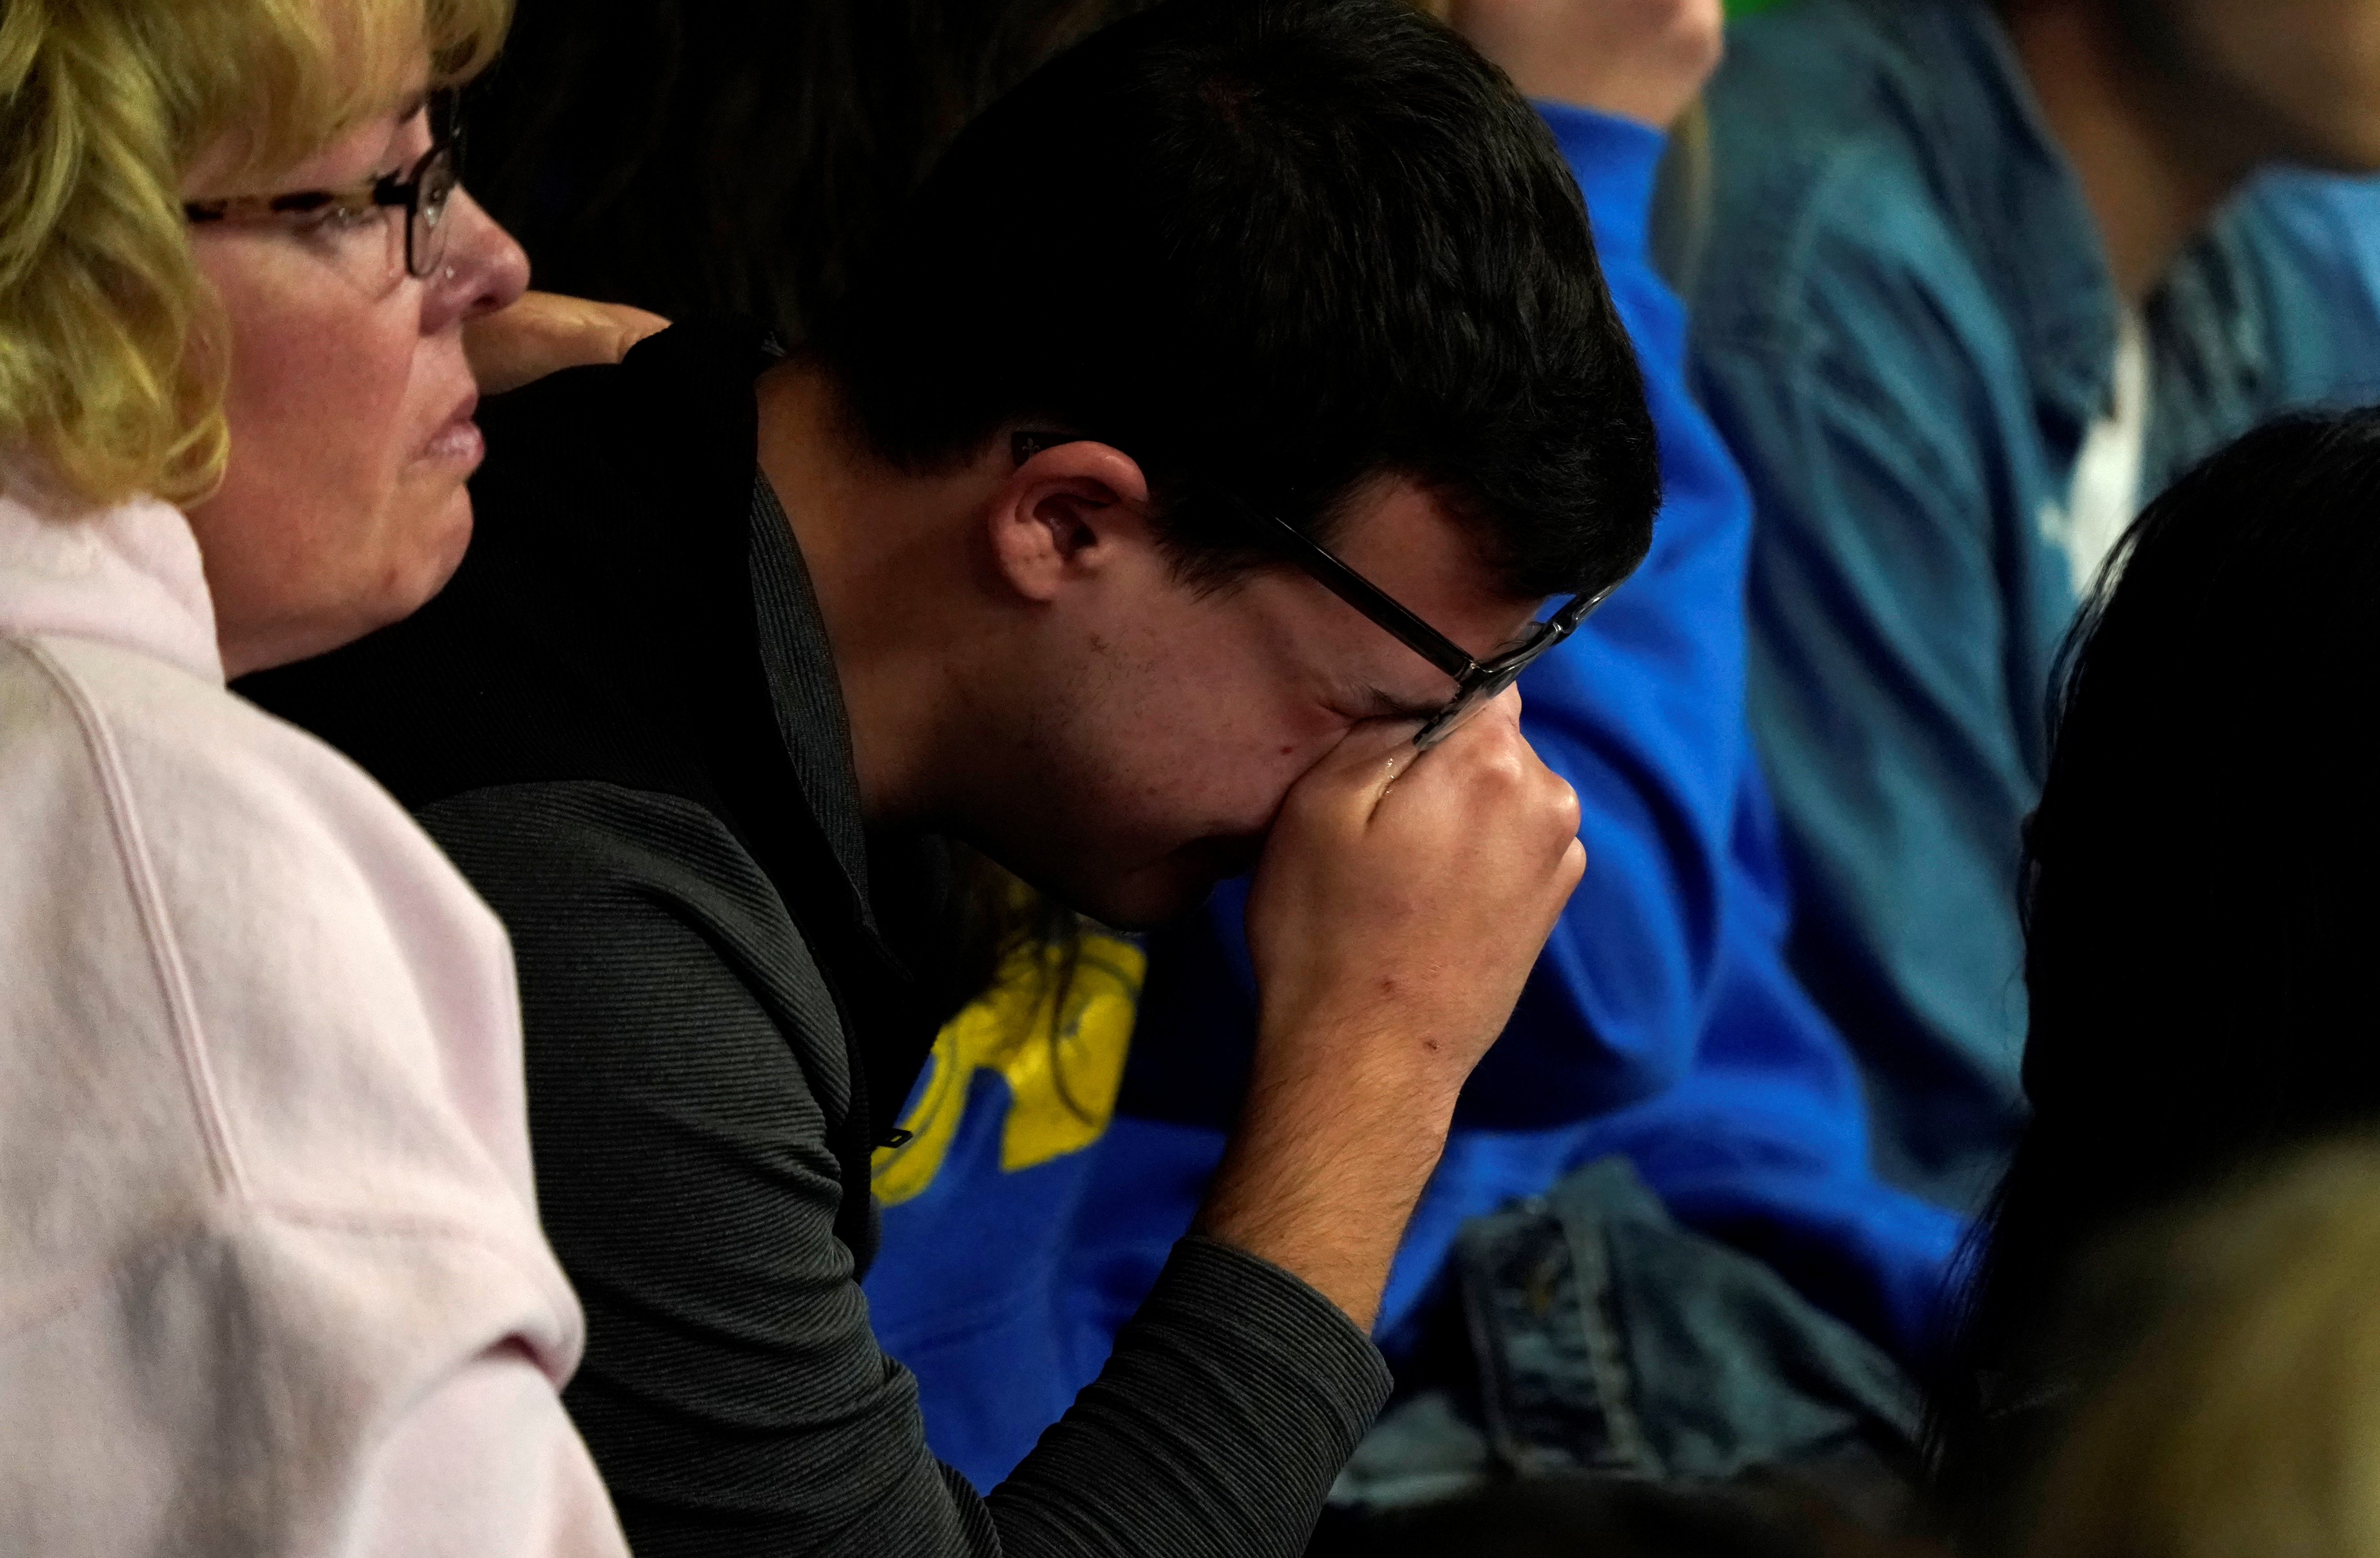 A man cries at a vigil for the victims of the shooting at the Science, Technology, Engineering and Math (STEM) School in Highlands Ranch, Colorado, U.S., May 8, 2019. REUTERS/Rick Wilking 